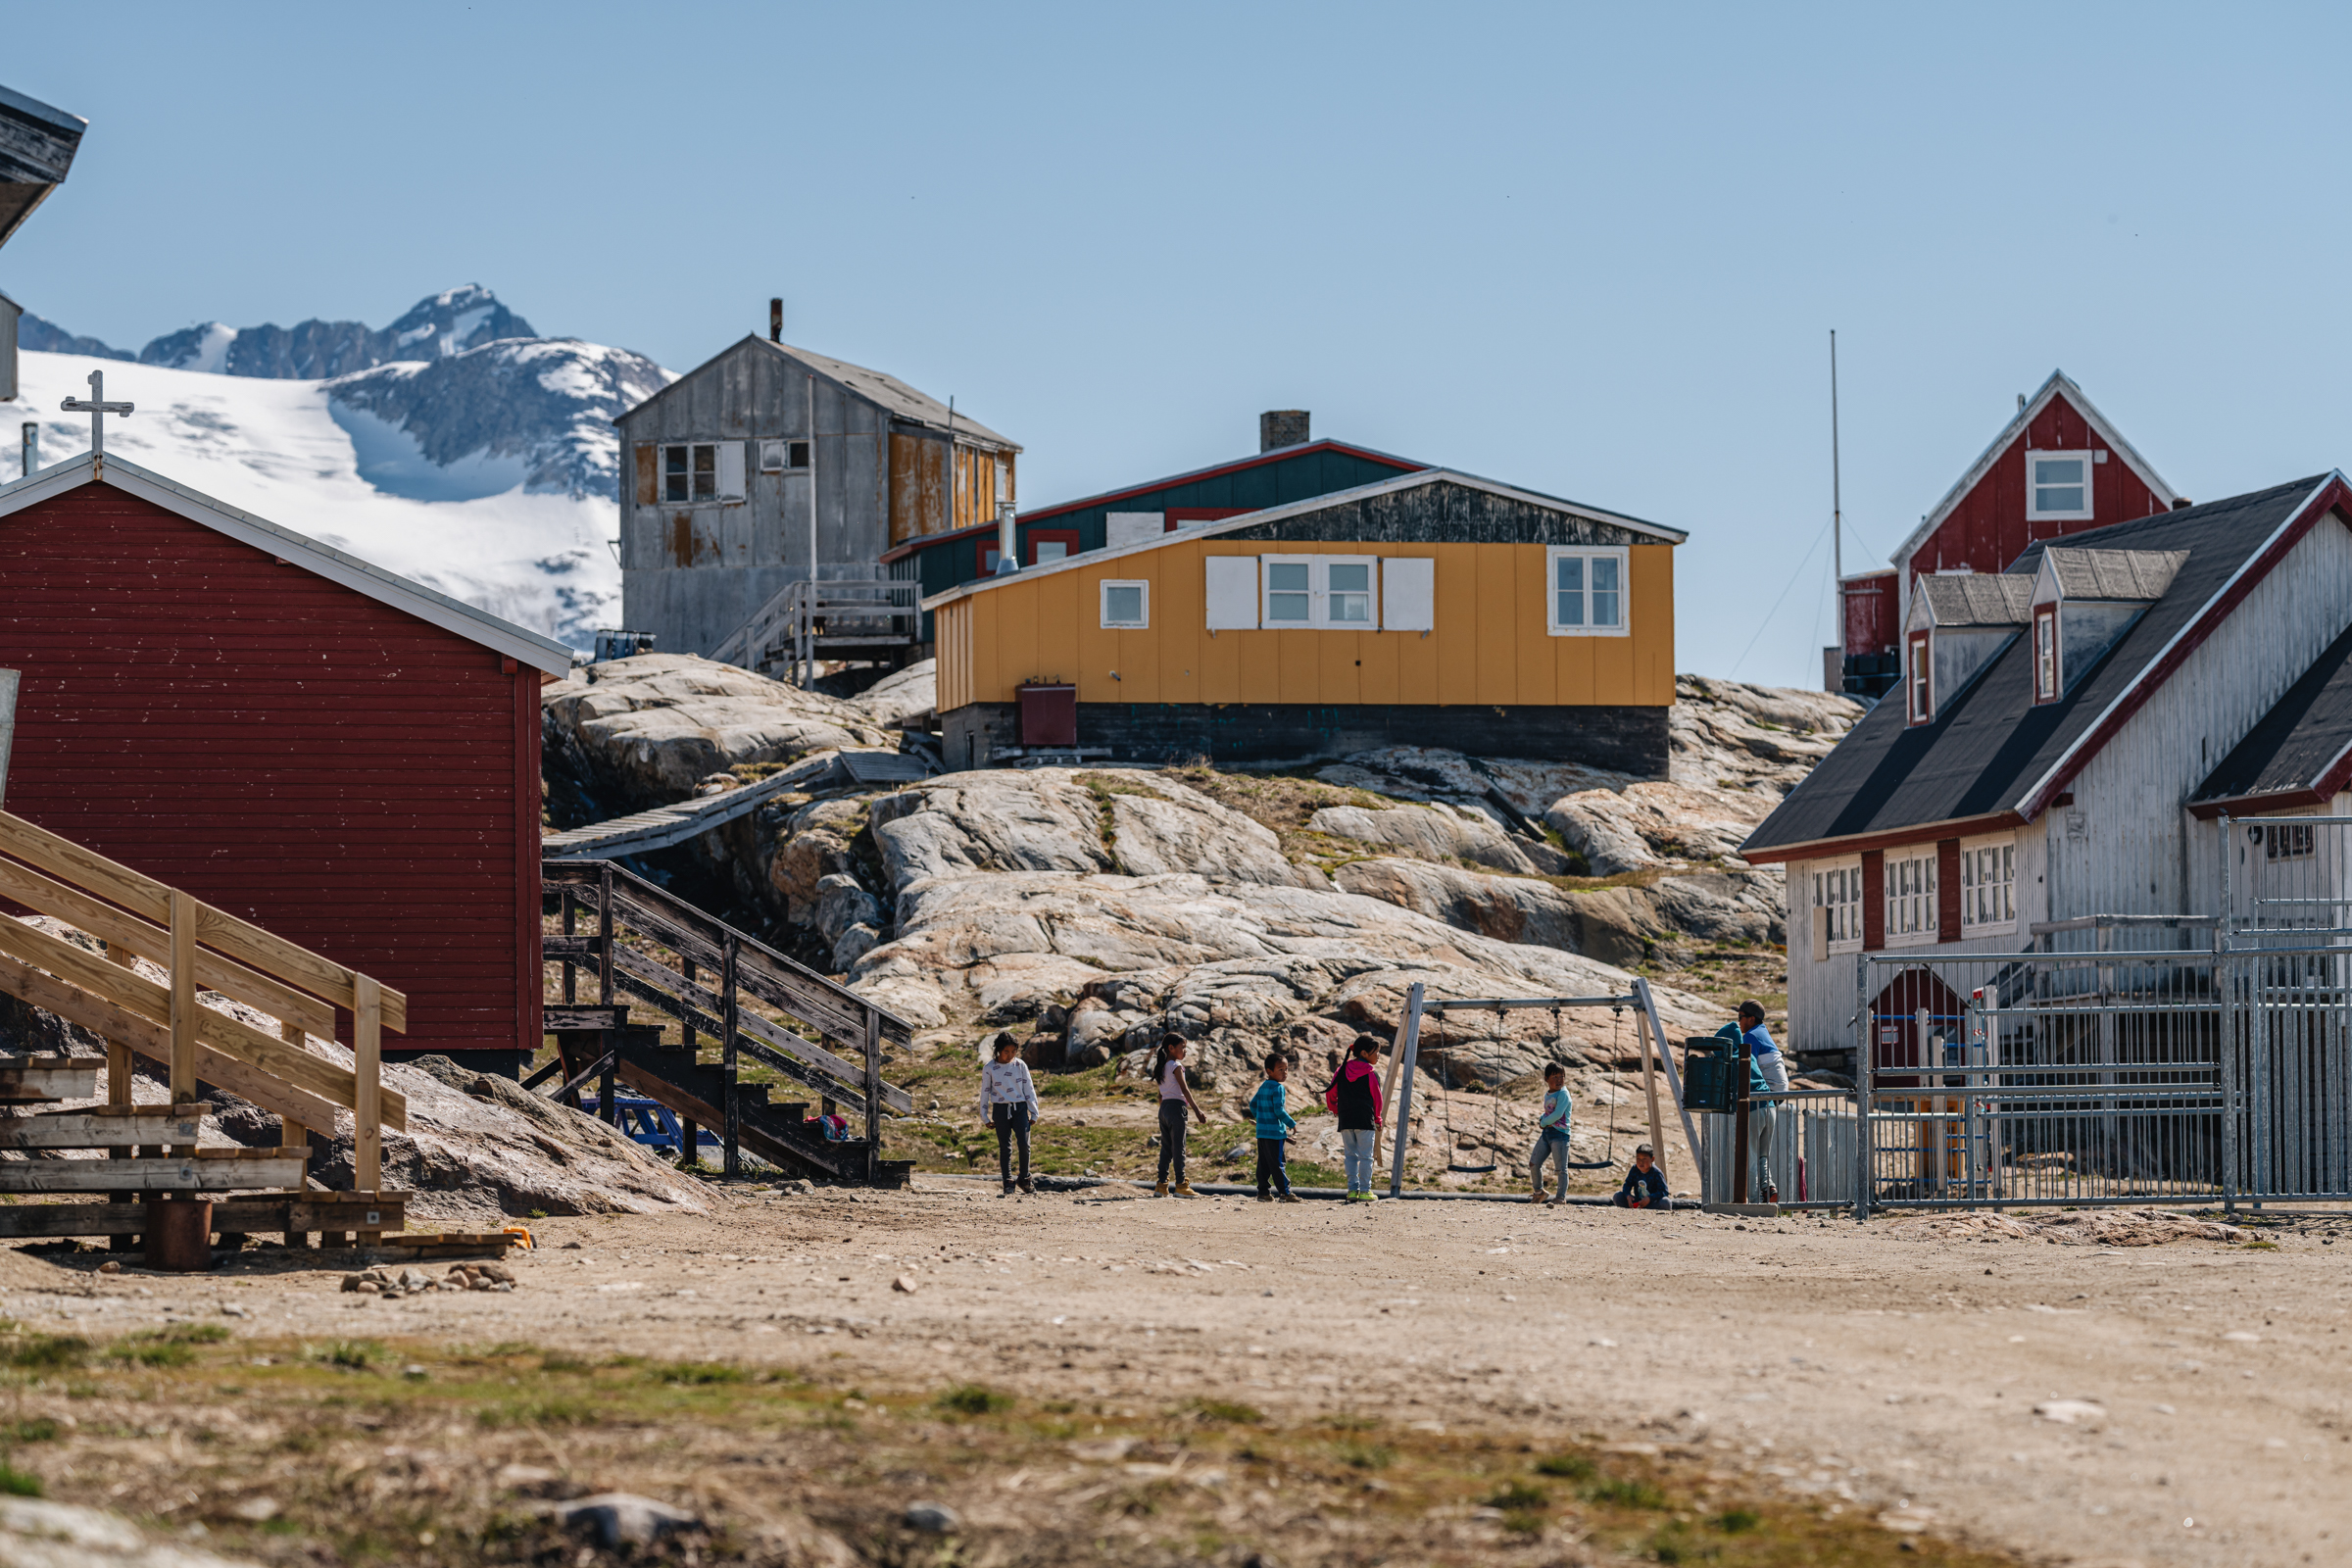 Local kids playing outside. Photo by Filip Gielda - Visit East Greenland